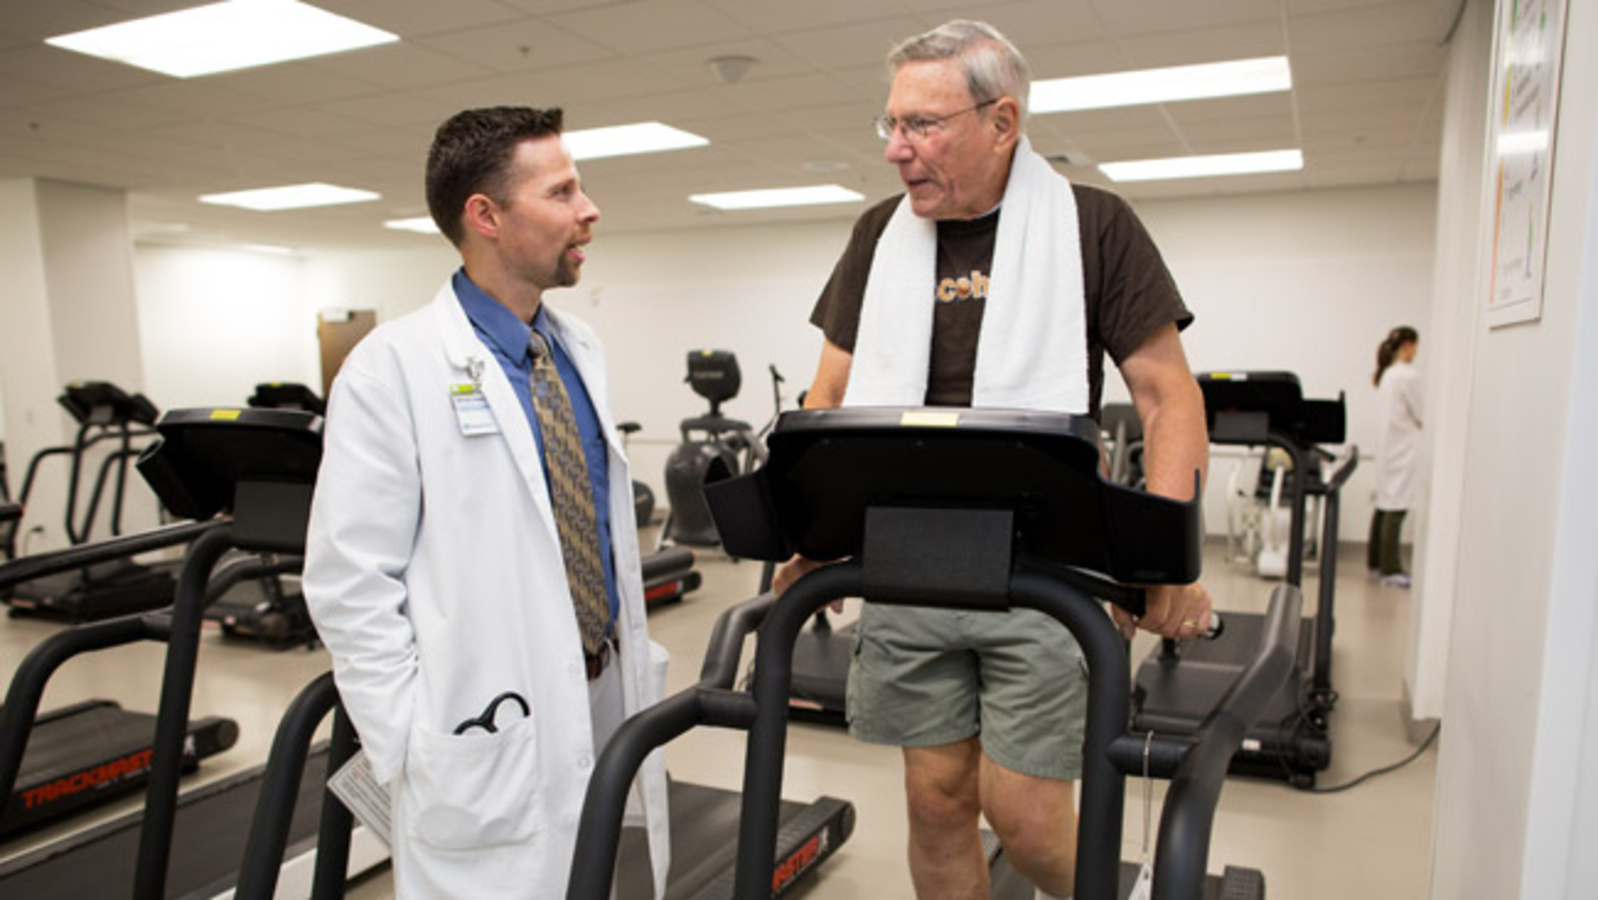 Cardiac rehabilitation: What it is, advantages, heart conditions it can manage | Health